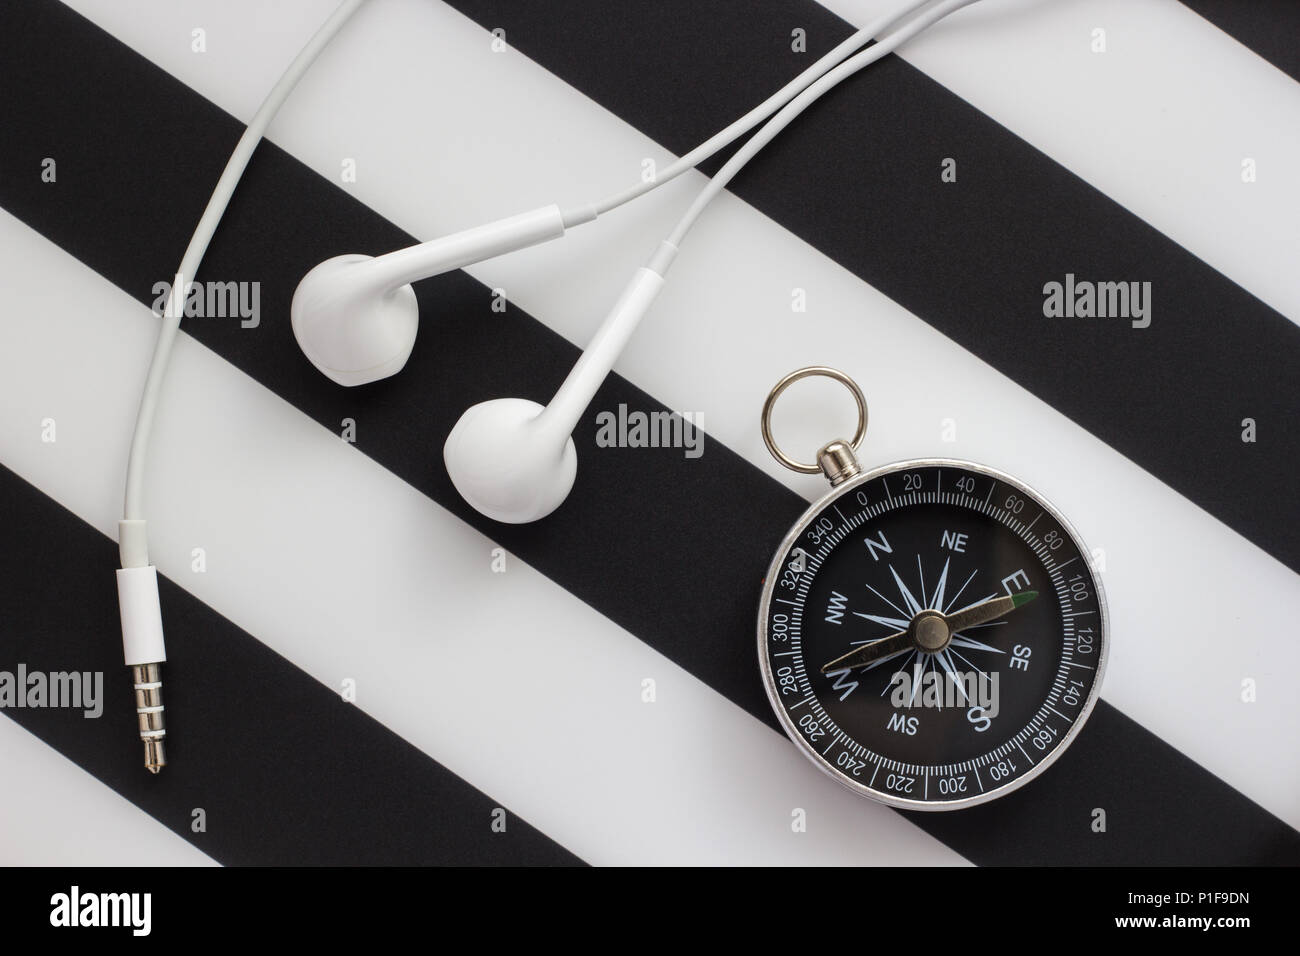 headphones and compass on black and white background, close-up Stock Photo